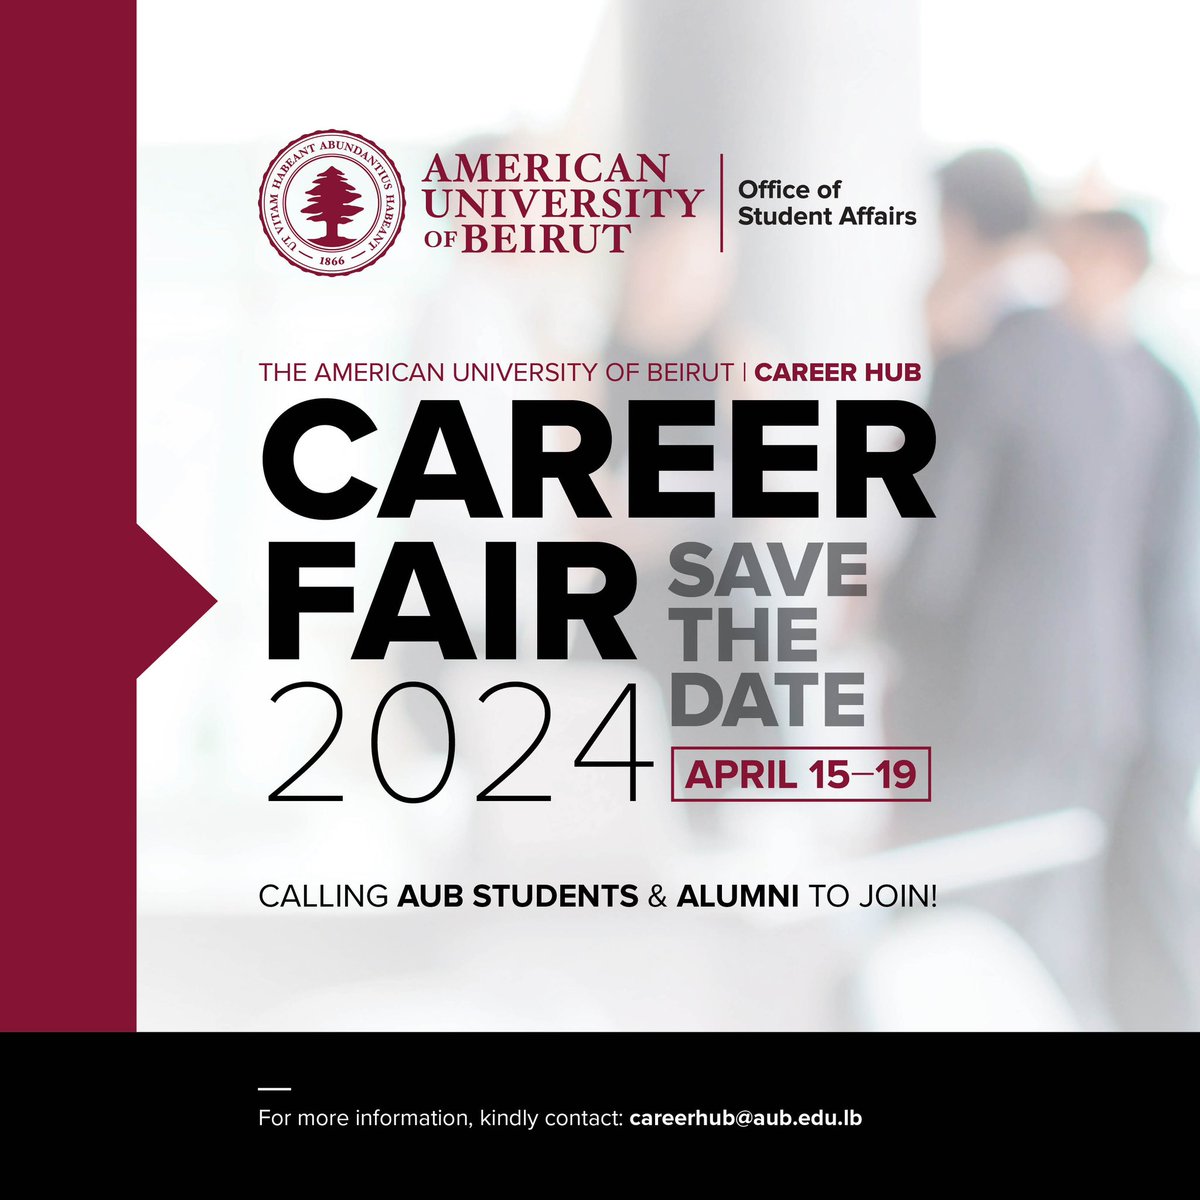 Join us at the AUB Career Fair 2024! Calling all AUB students and alumni to mark their calendars for April 15-19. Don't miss this opportunity to connect with top employers and explore exciting career prospects. Contact careerhub@aub.edu.lb for more info.